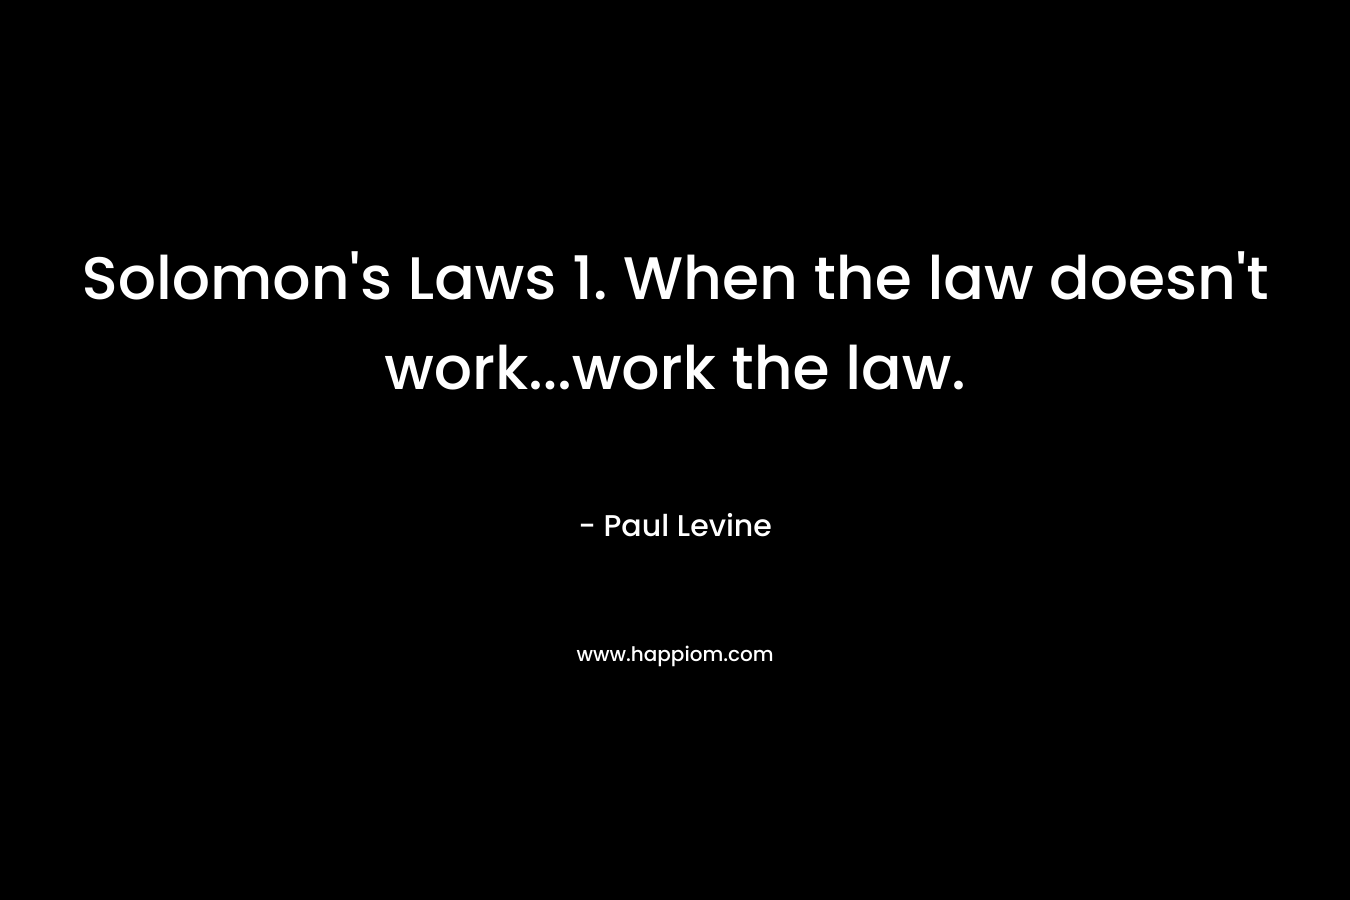 Solomon's Laws 1. When the law doesn't work...work the law.